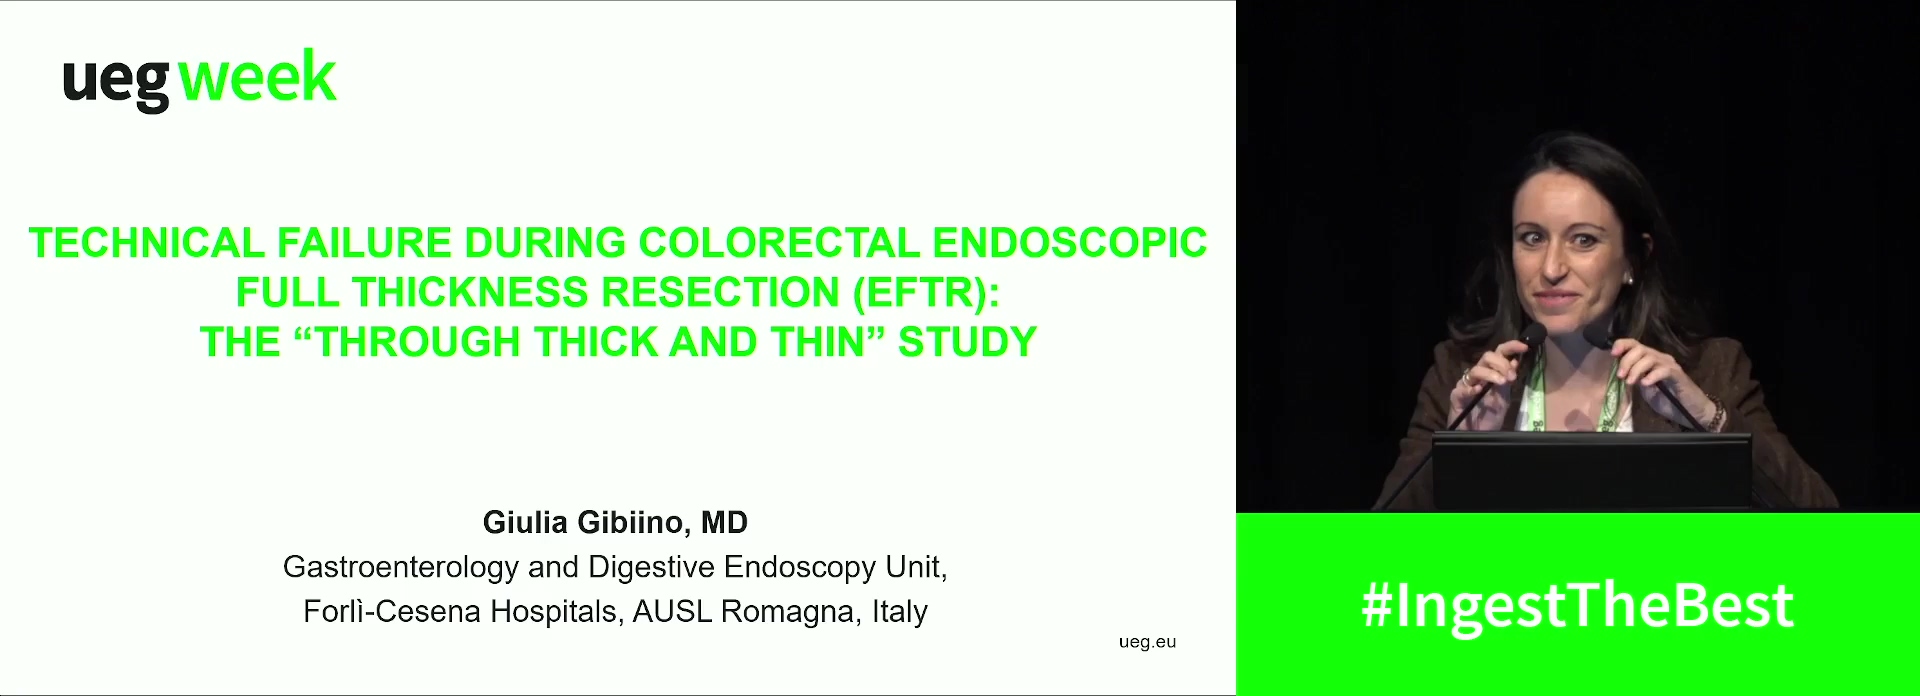 TECHNICAL FAILURE DURING COLORECTAL ENDOSCOPIC FULL THICKNESS RESECTION (EFTR): THE “THROUGH THICK AND THIN” STUDY